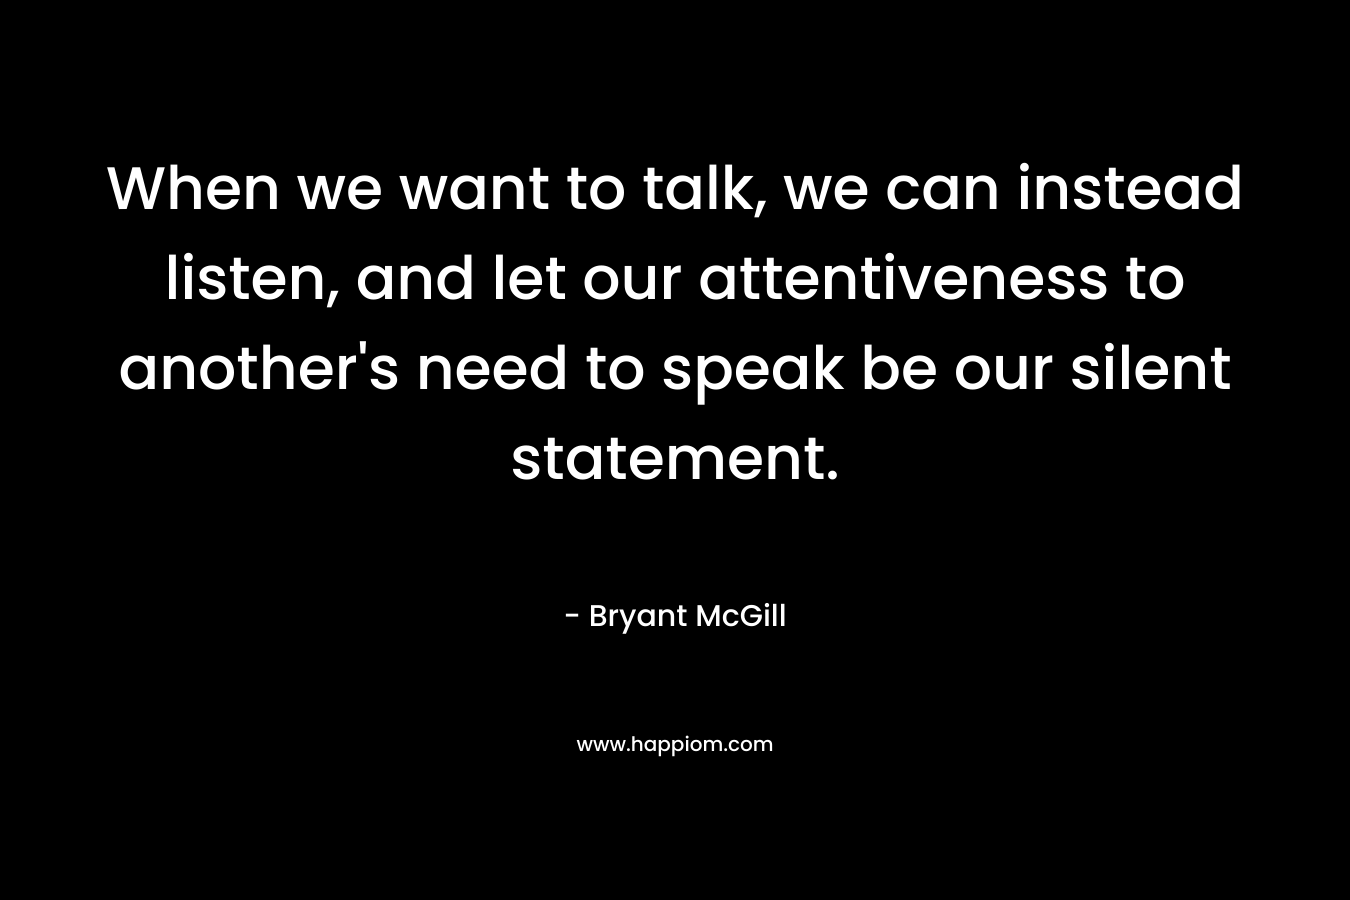 When we want to talk, we can instead listen, and let our attentiveness to another’s need to speak be our silent statement. – Bryant McGill